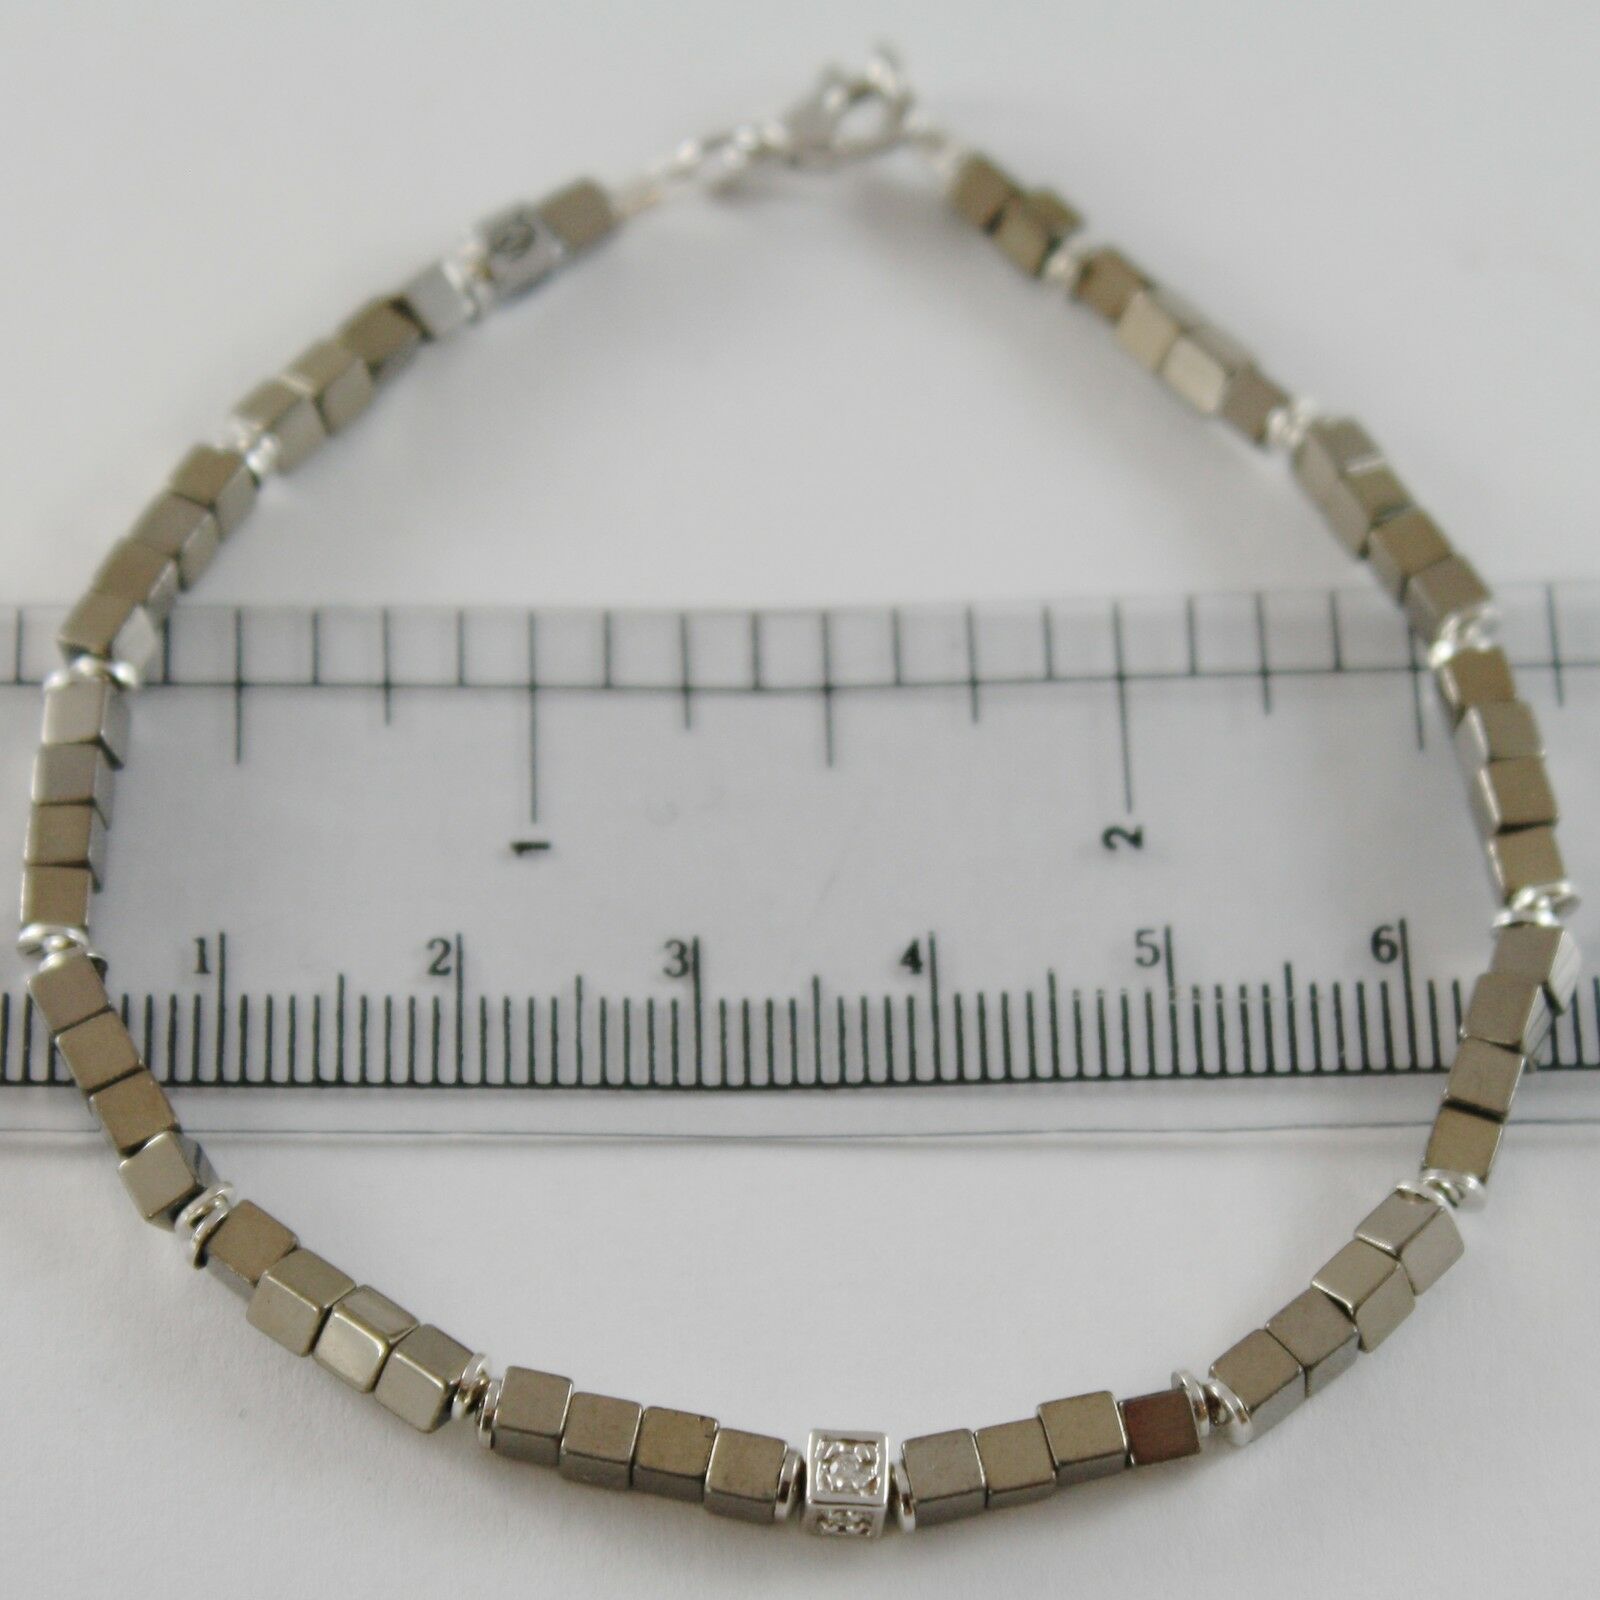 Primary image for 925 SILVER BRACELET 4 WHITE DIAMONDS & GREY CUBES SMOOTH HEMATITE MADE IN ITALY